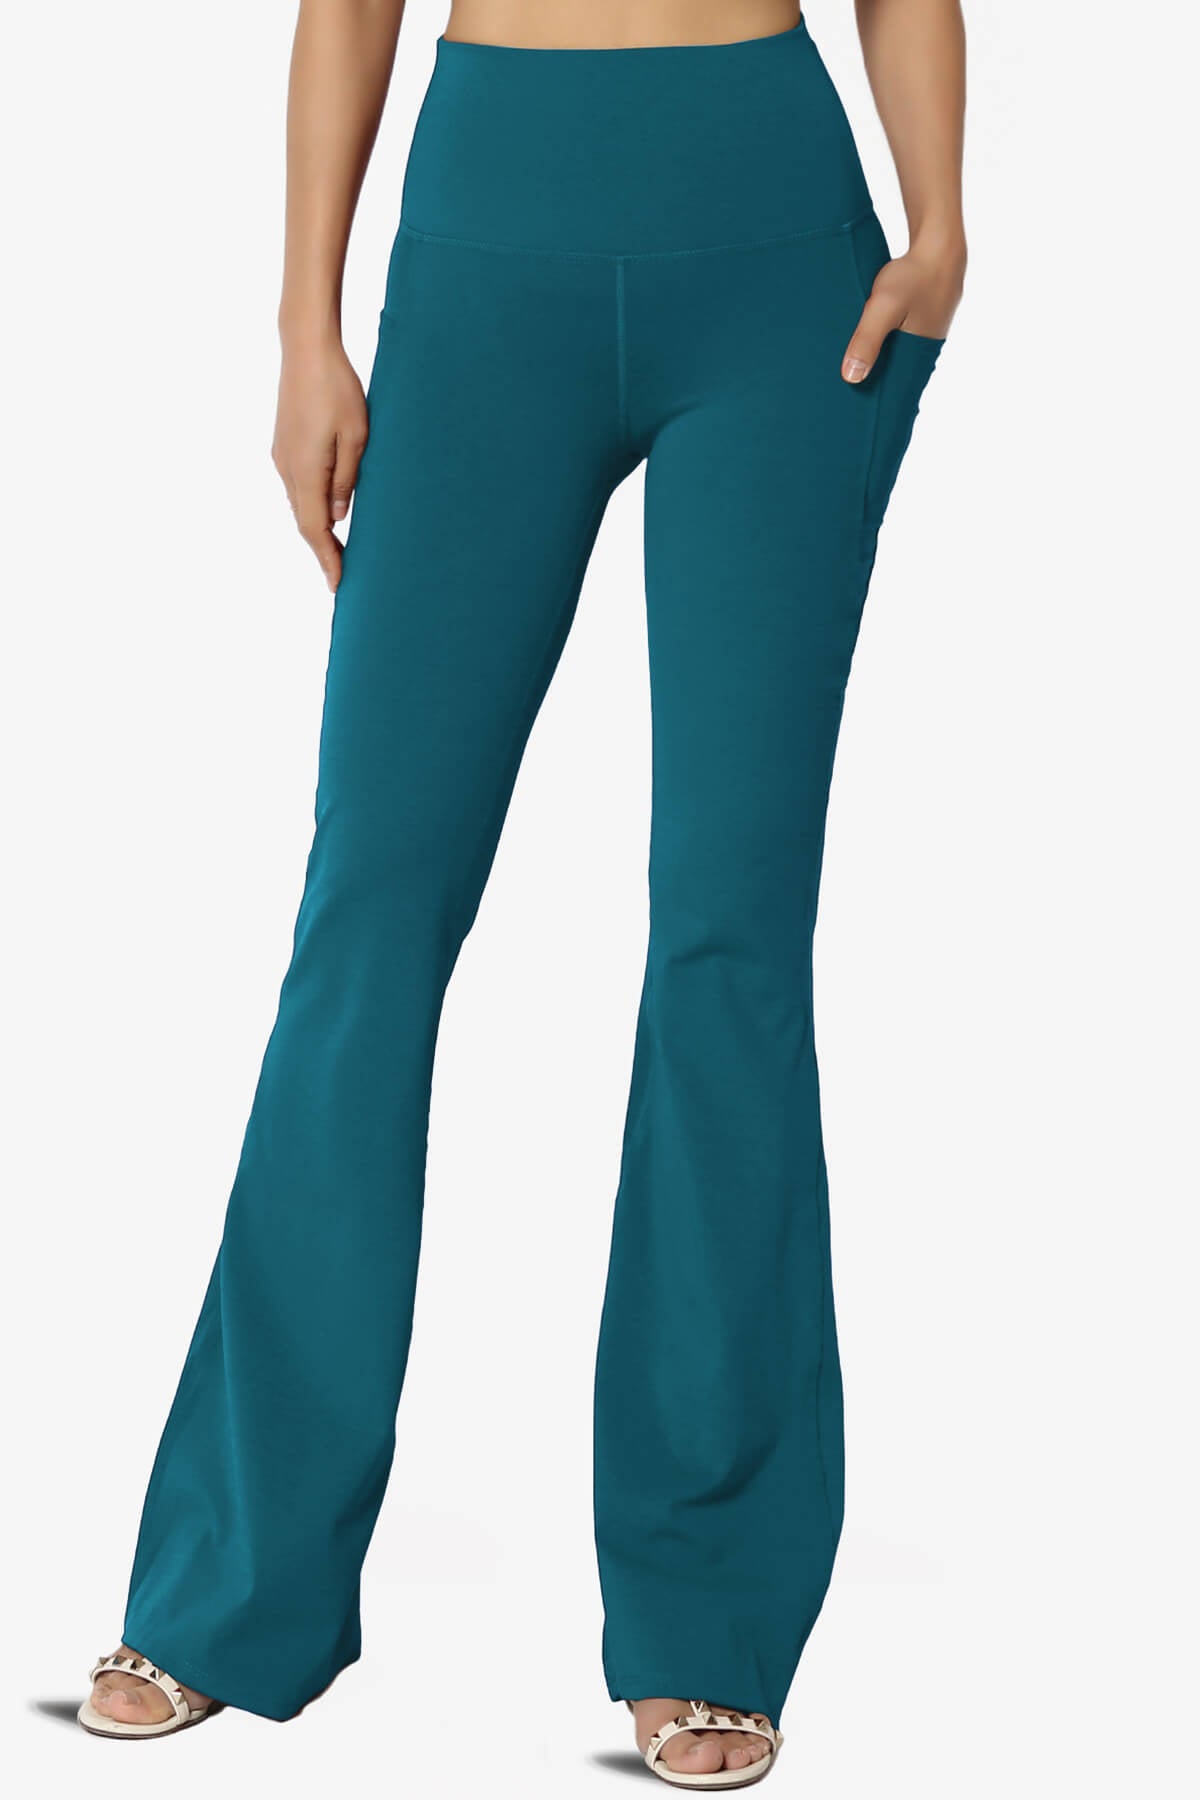 Load image into Gallery viewer, Gemma Athletic Pocket Flare Yoga Pants TEAL_1
